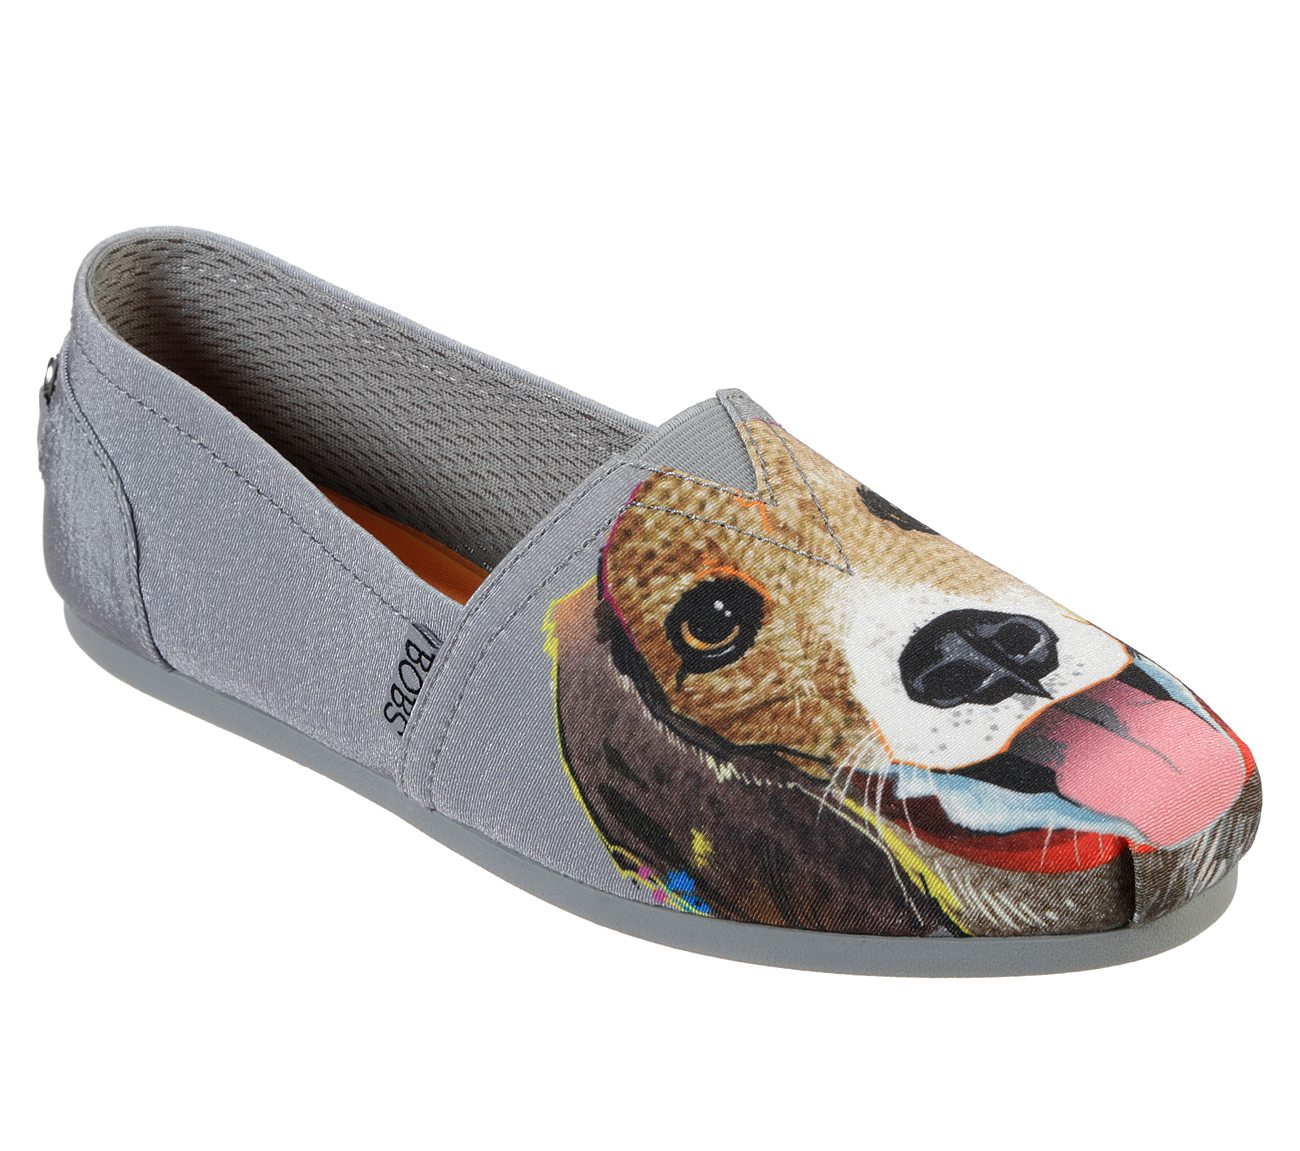 skechers with dogs on them